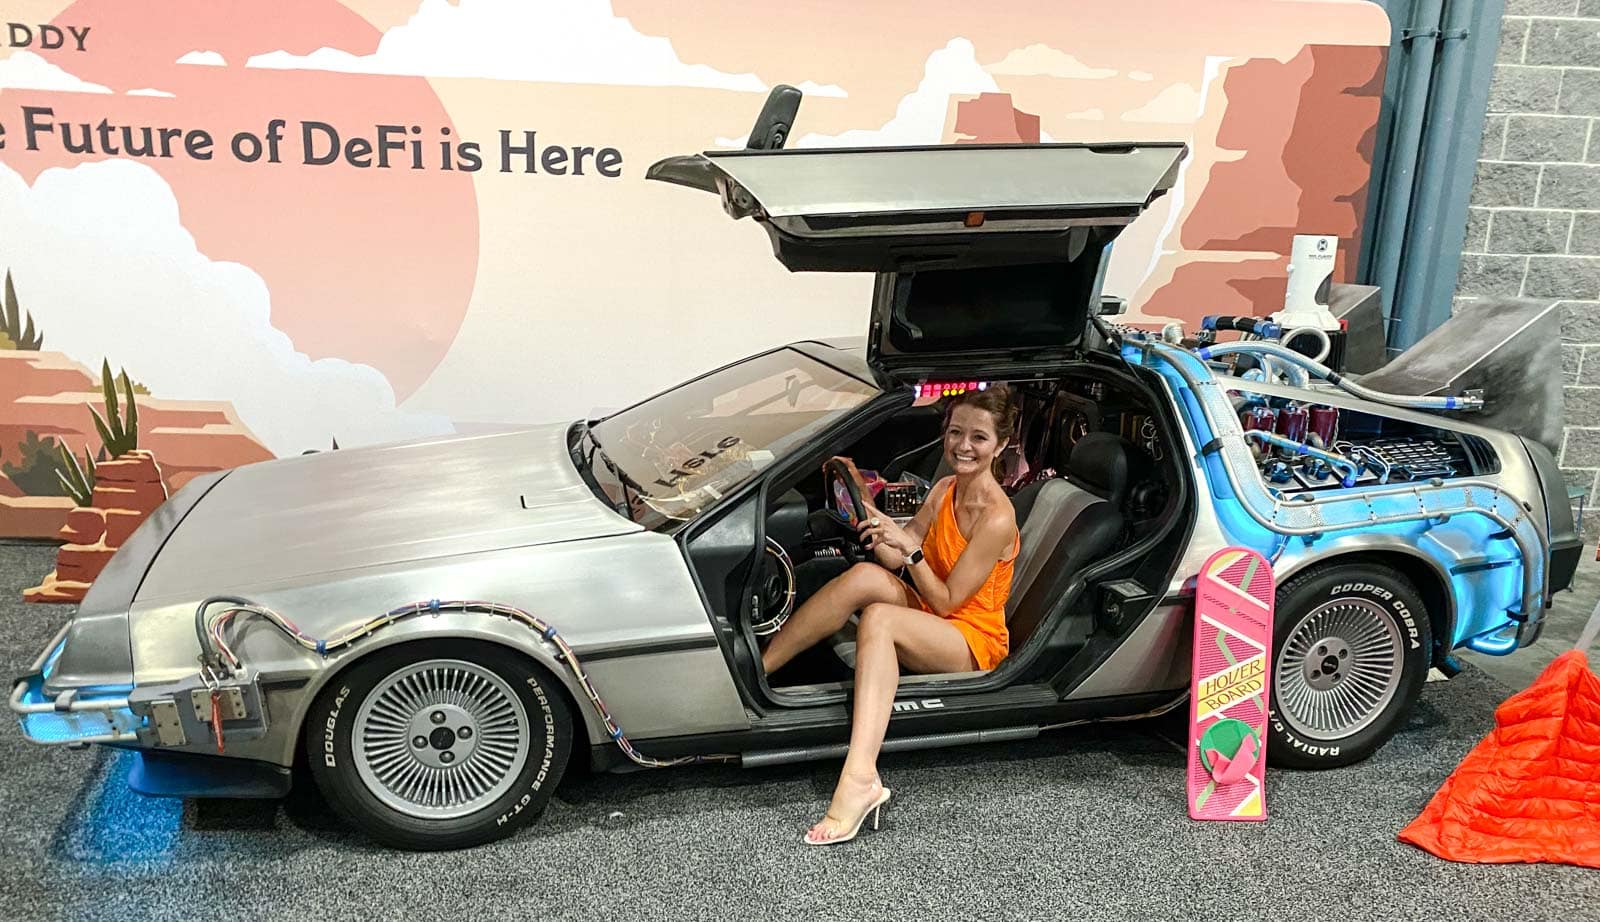 You could step into a DeLorean Wayback machine on the trade show floor.